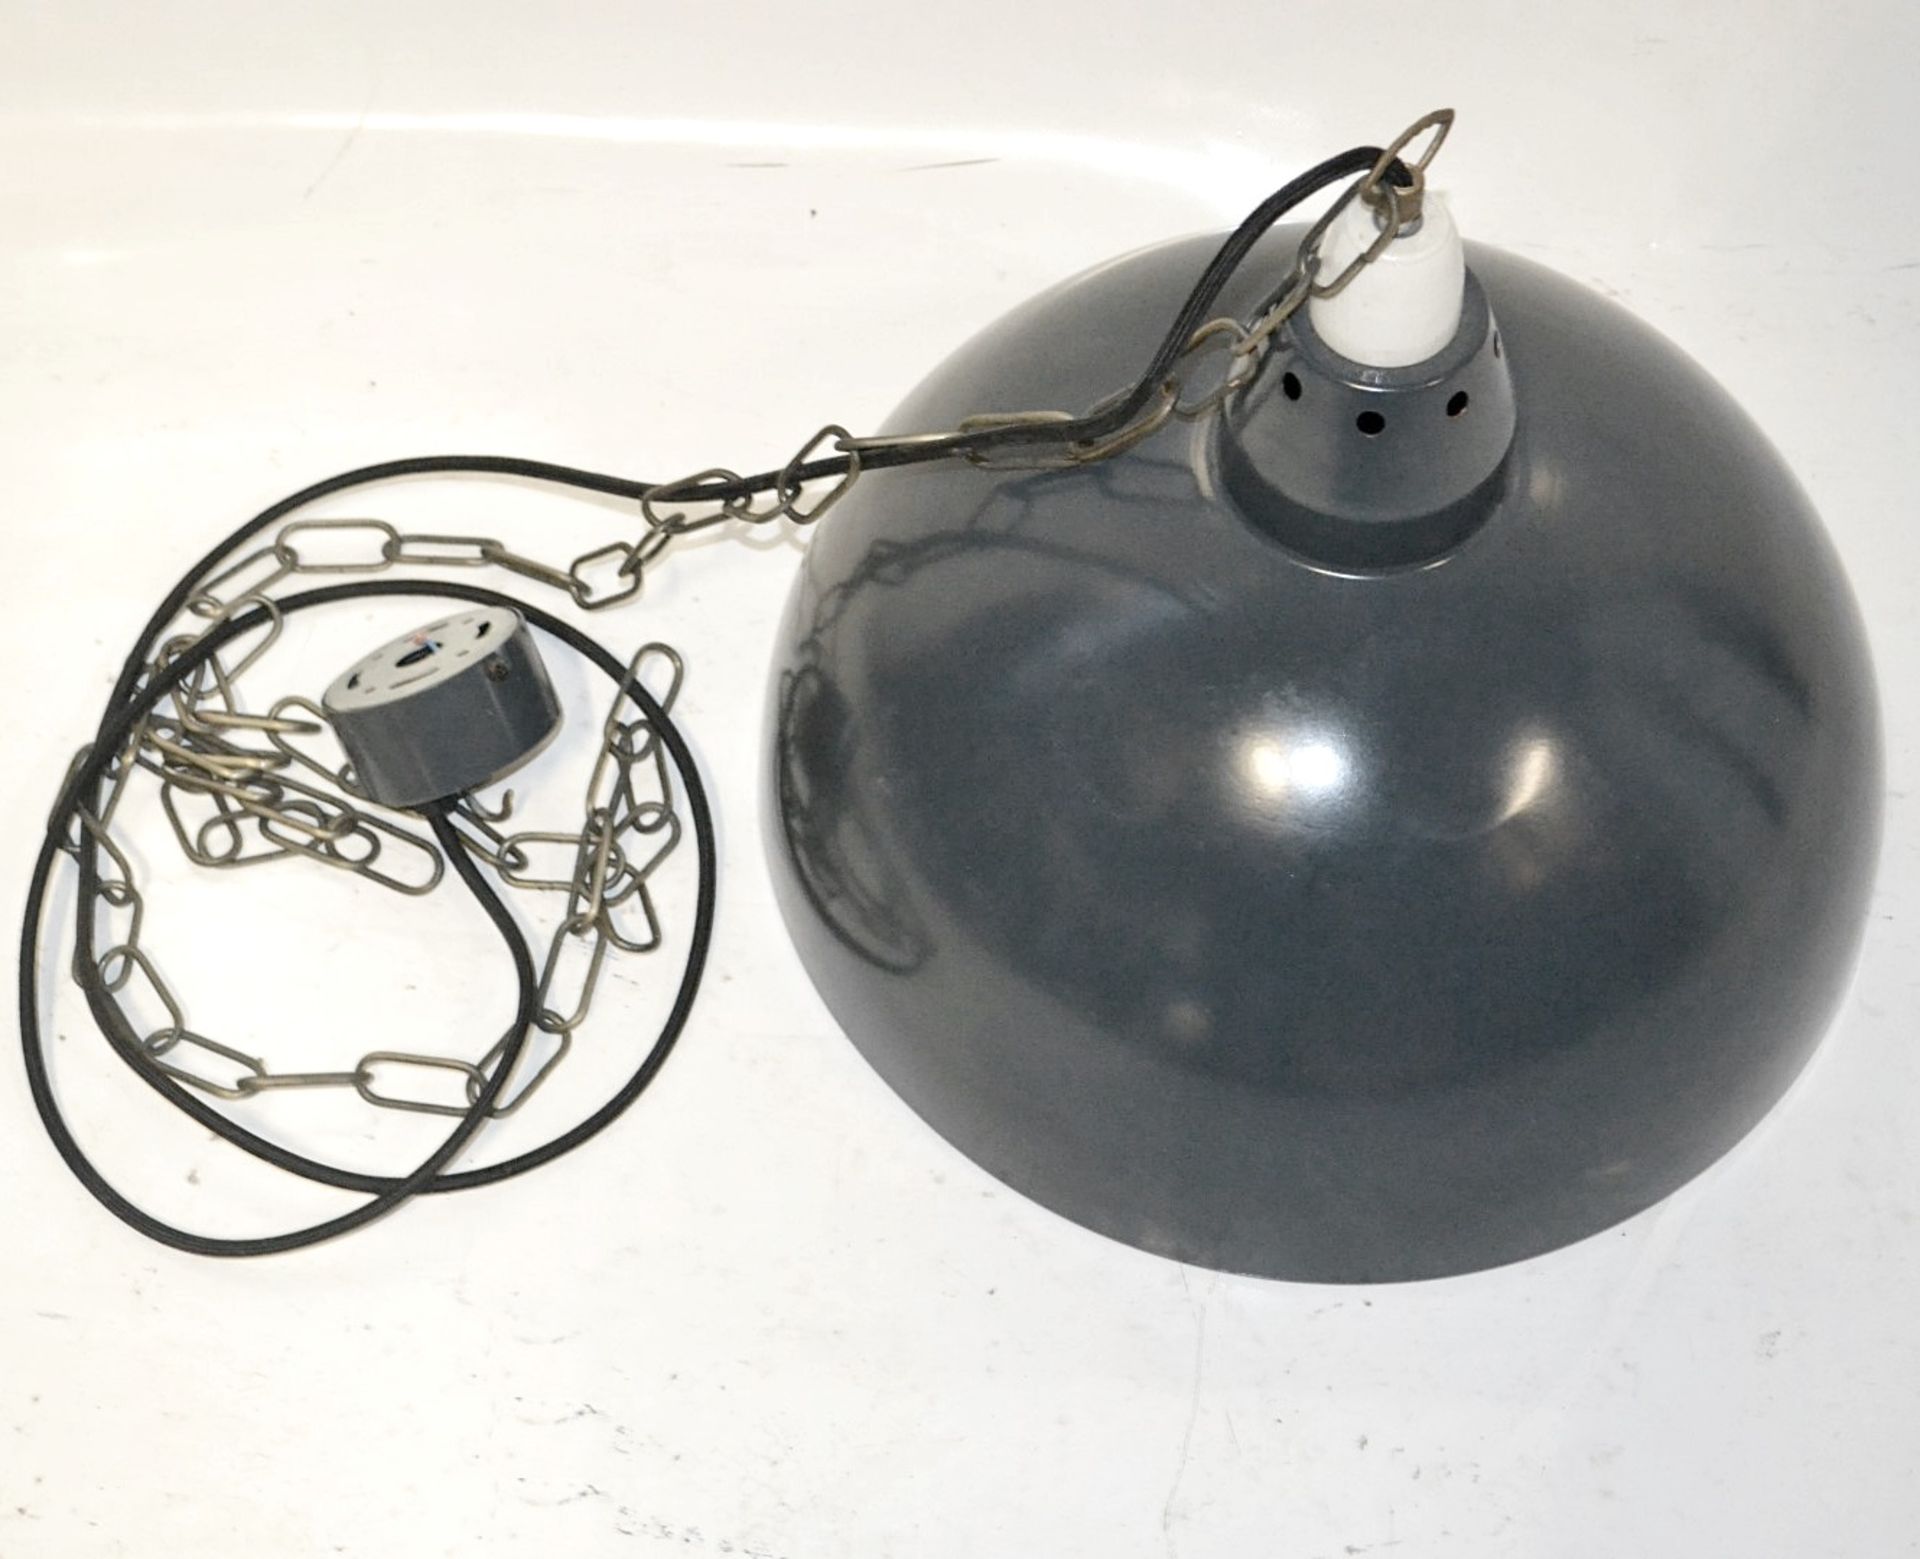 10 x Dome Pendant Ceiling Light Fittings With Chain And Black Fabric Flex - CL353 - Image 2 of 6